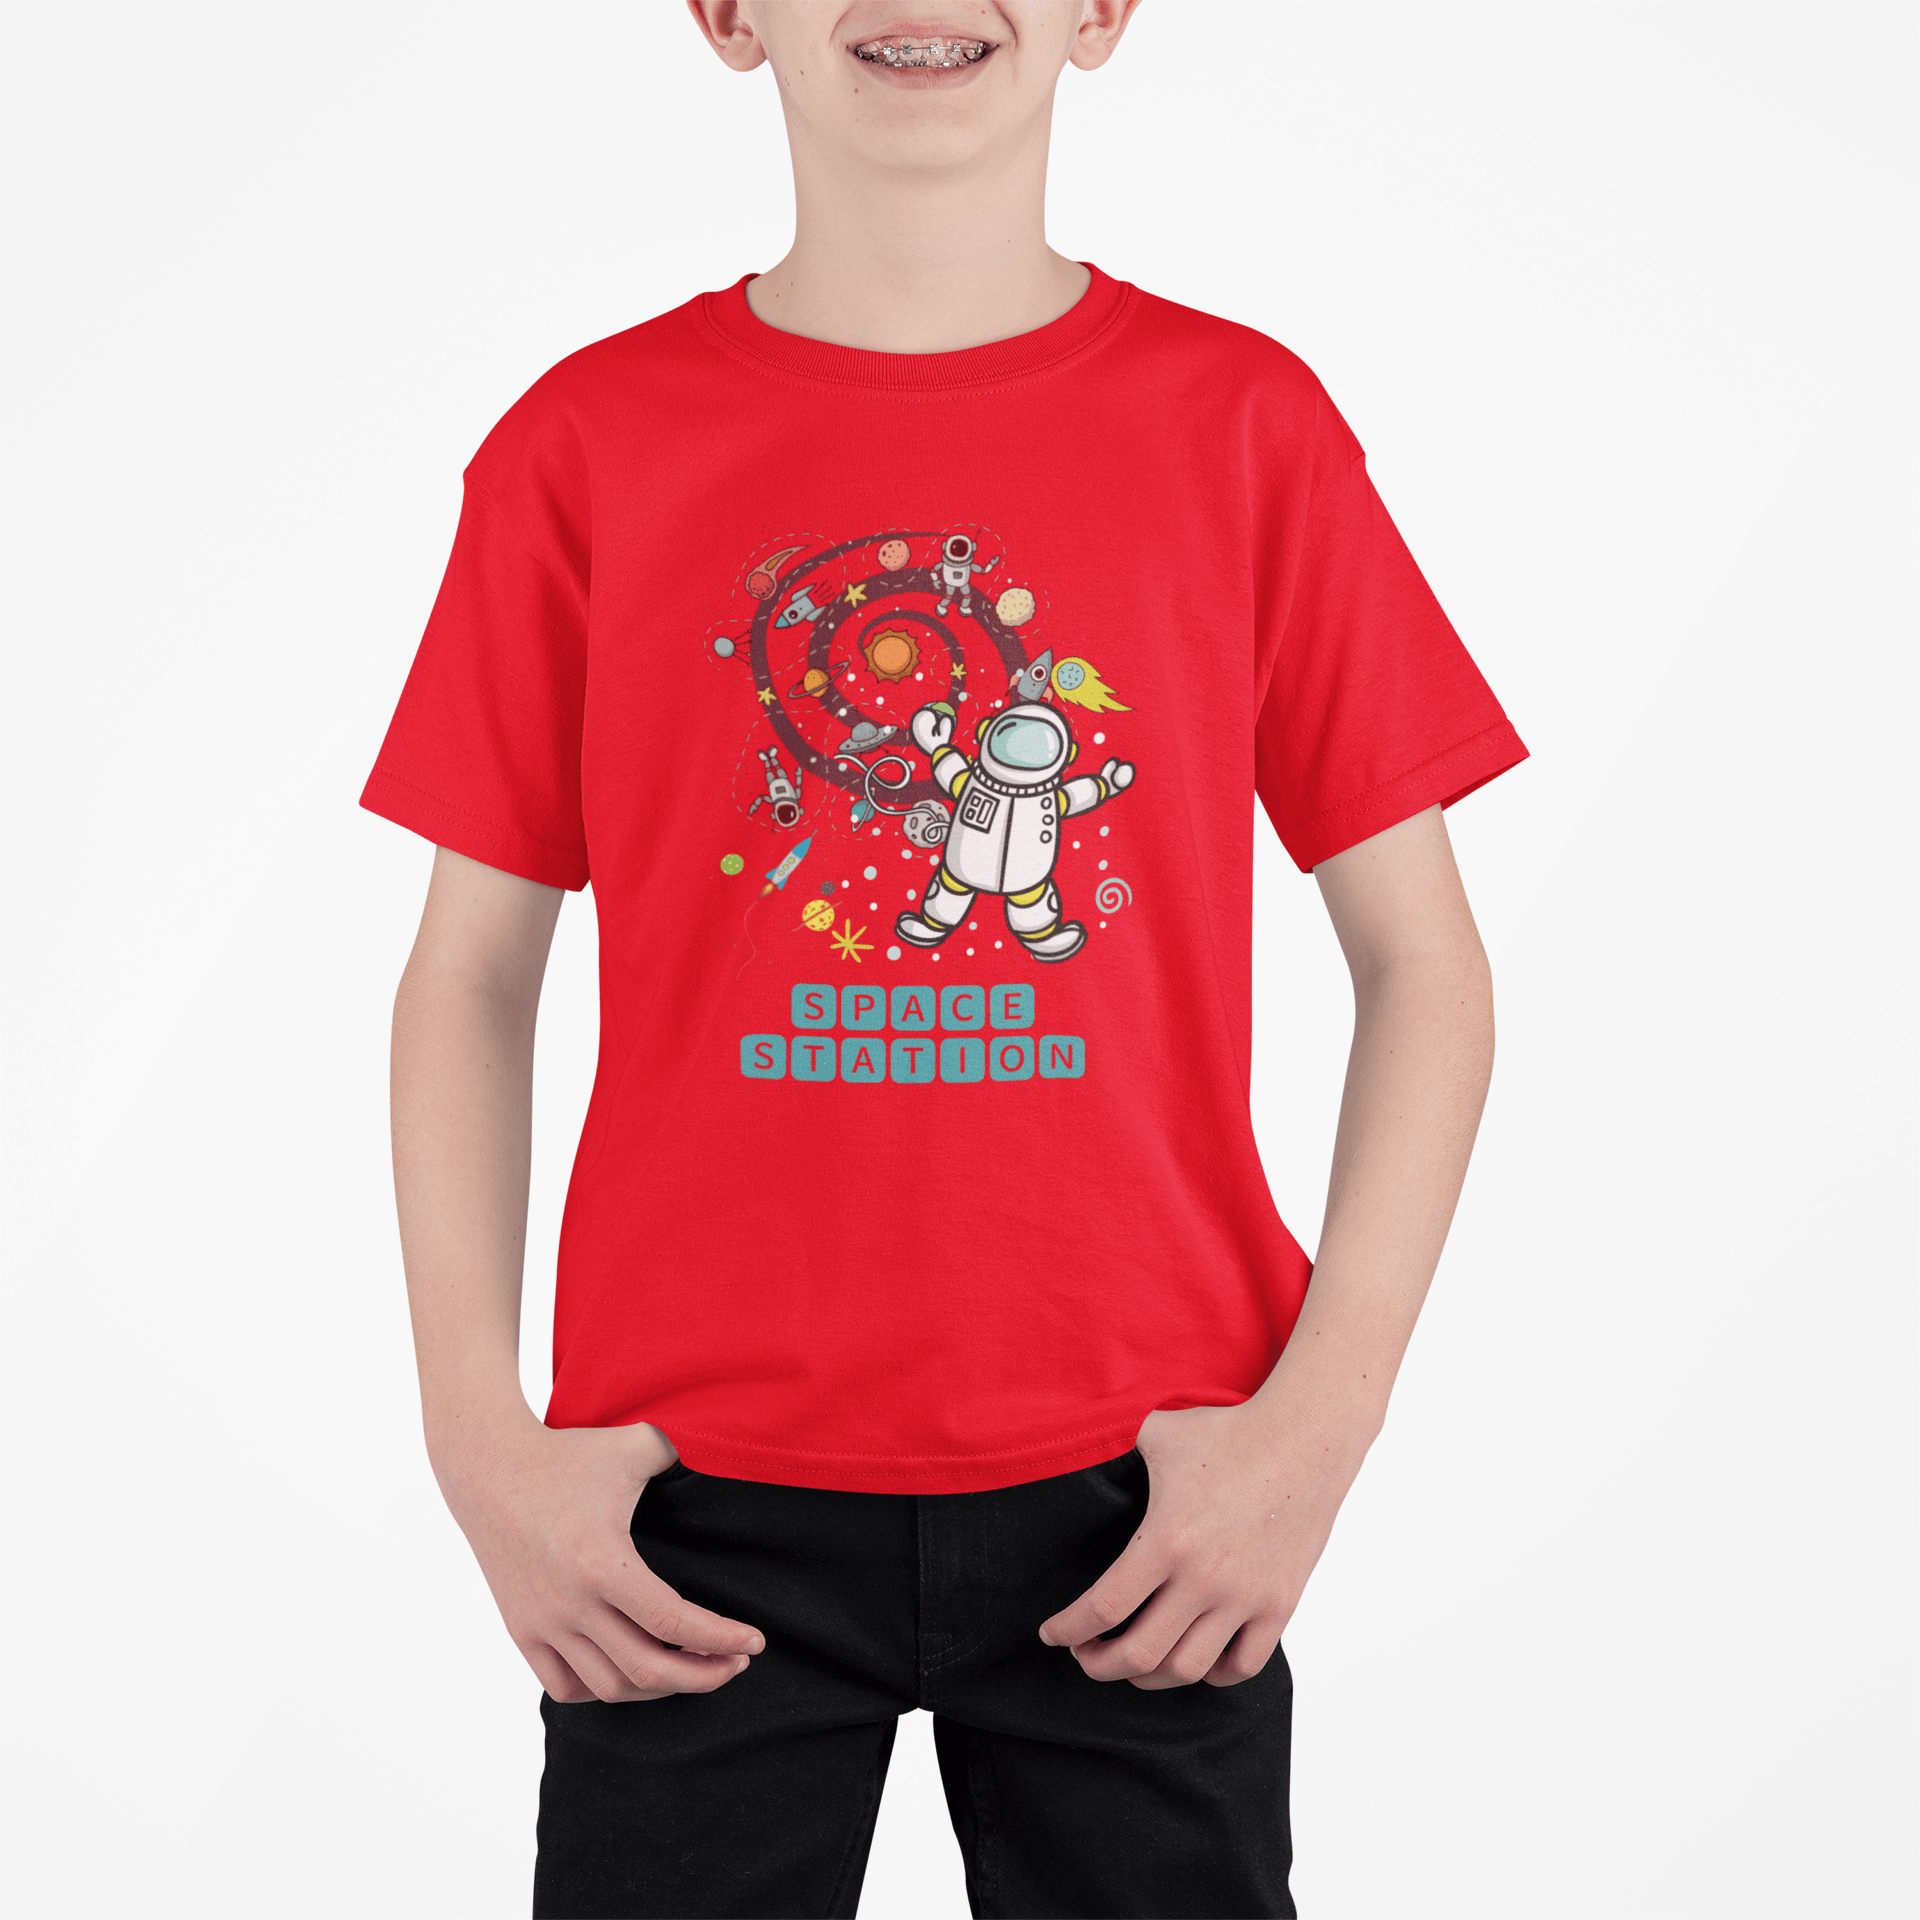 Space Station Astronaut Red T-shirt for Kids